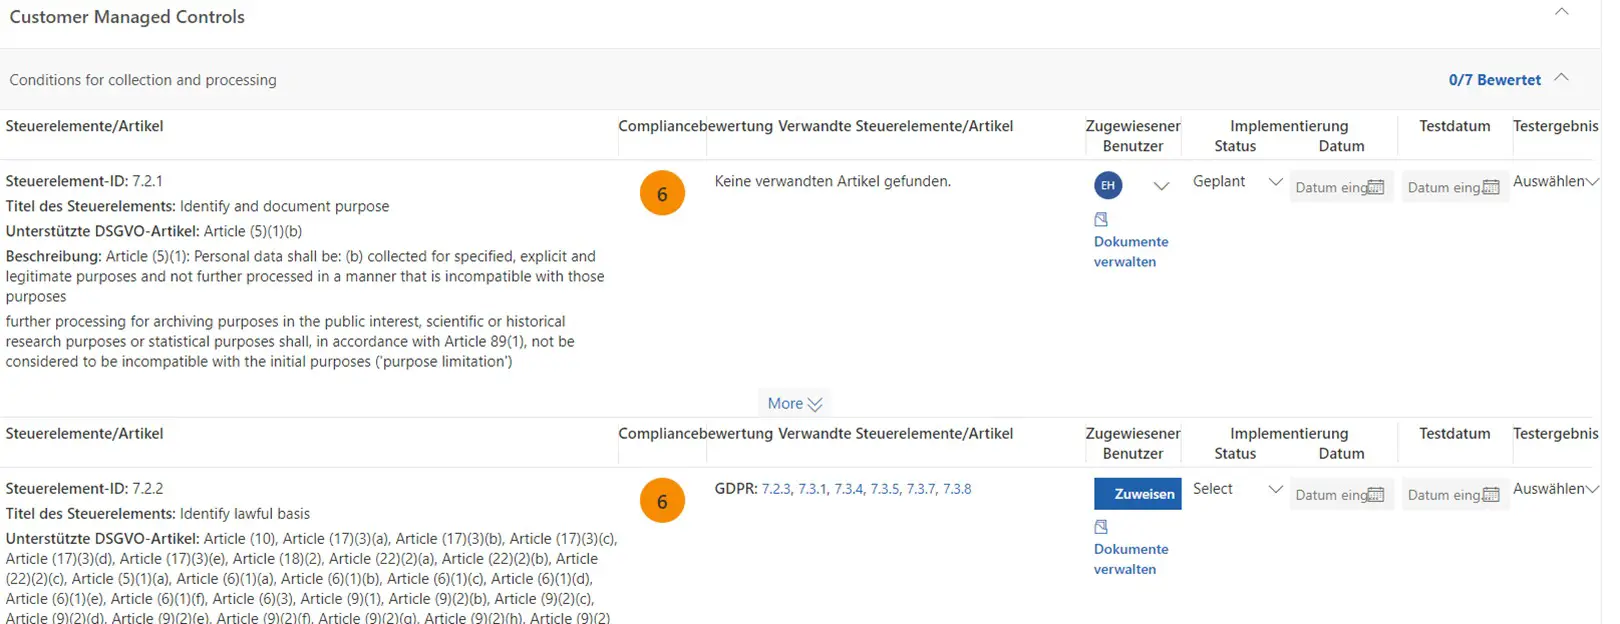 Extract from the customer responsible tasks with documentation in the Compliance Manager. Source: Screenshot Microsoft.com  